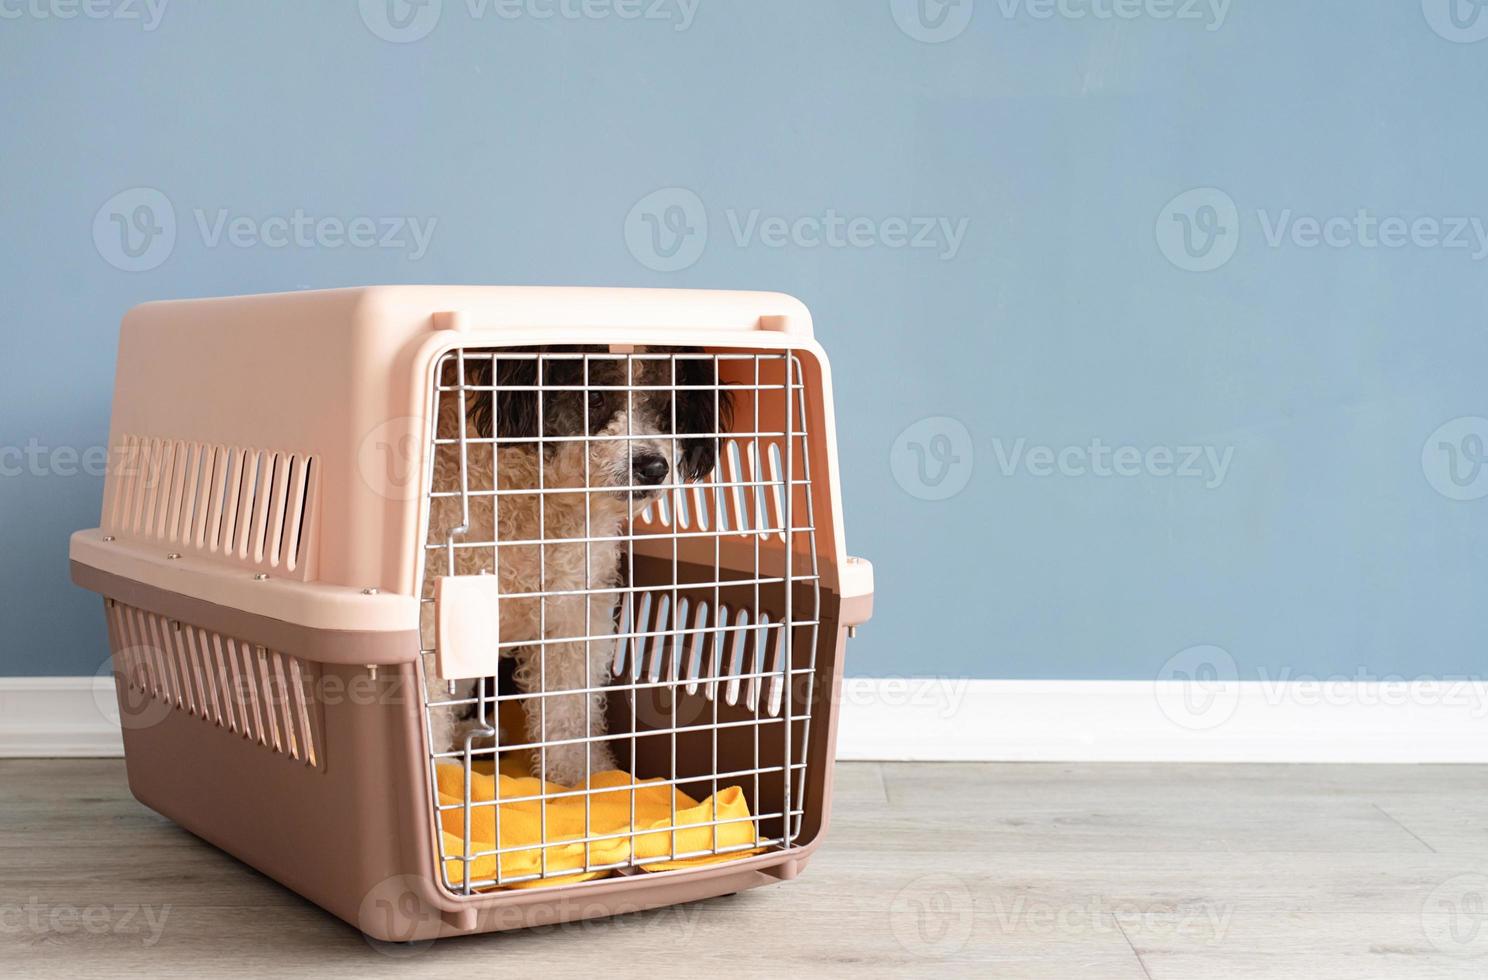 Cute bichon frise dog sitting by travel pet carrier, blue wall background photo